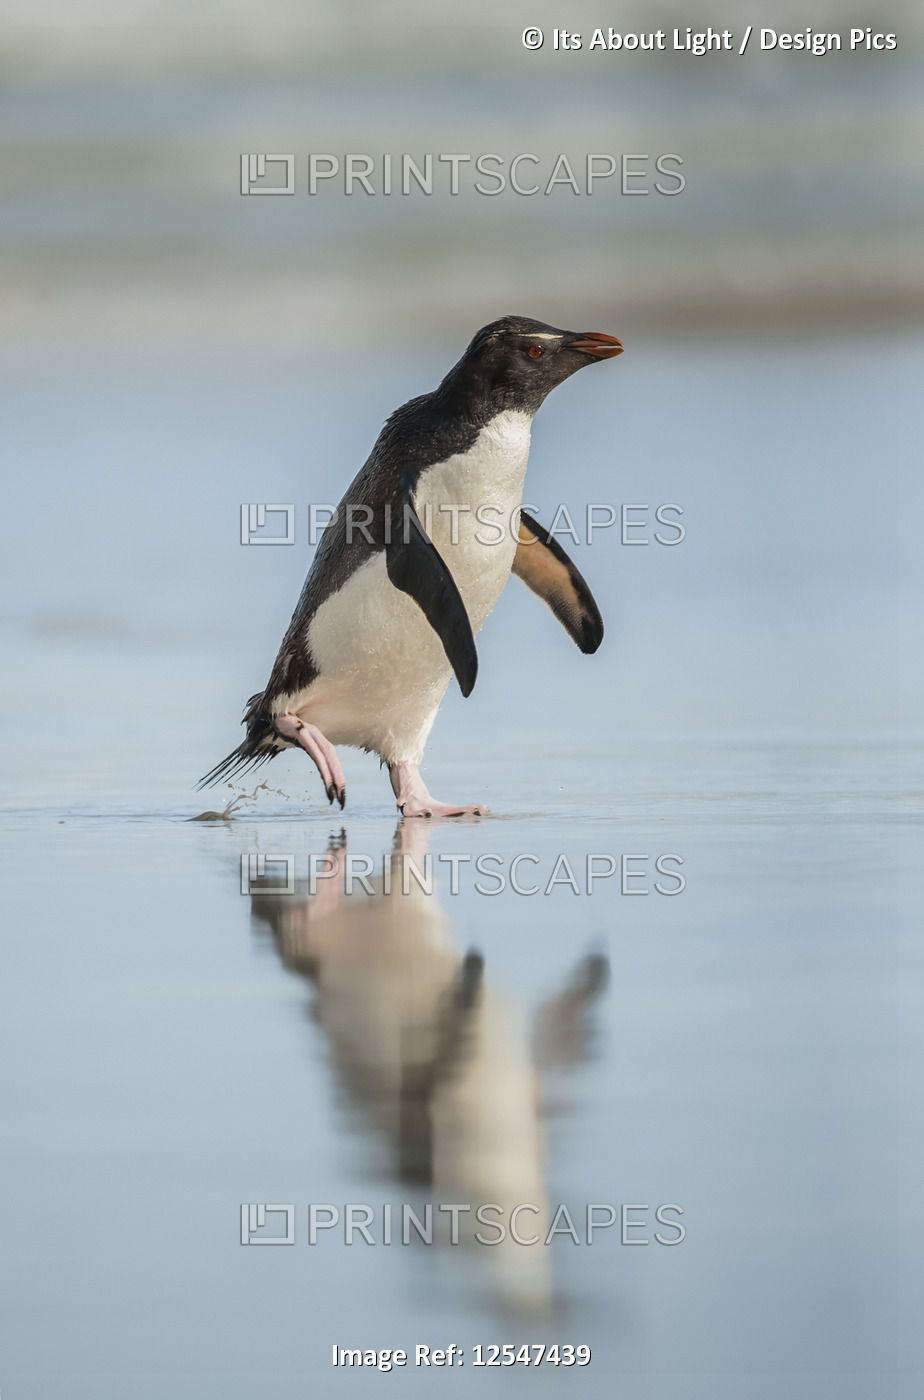 Gentoo penguin (Pygoscelis papua) walking on a wet surface with it's reflection ...